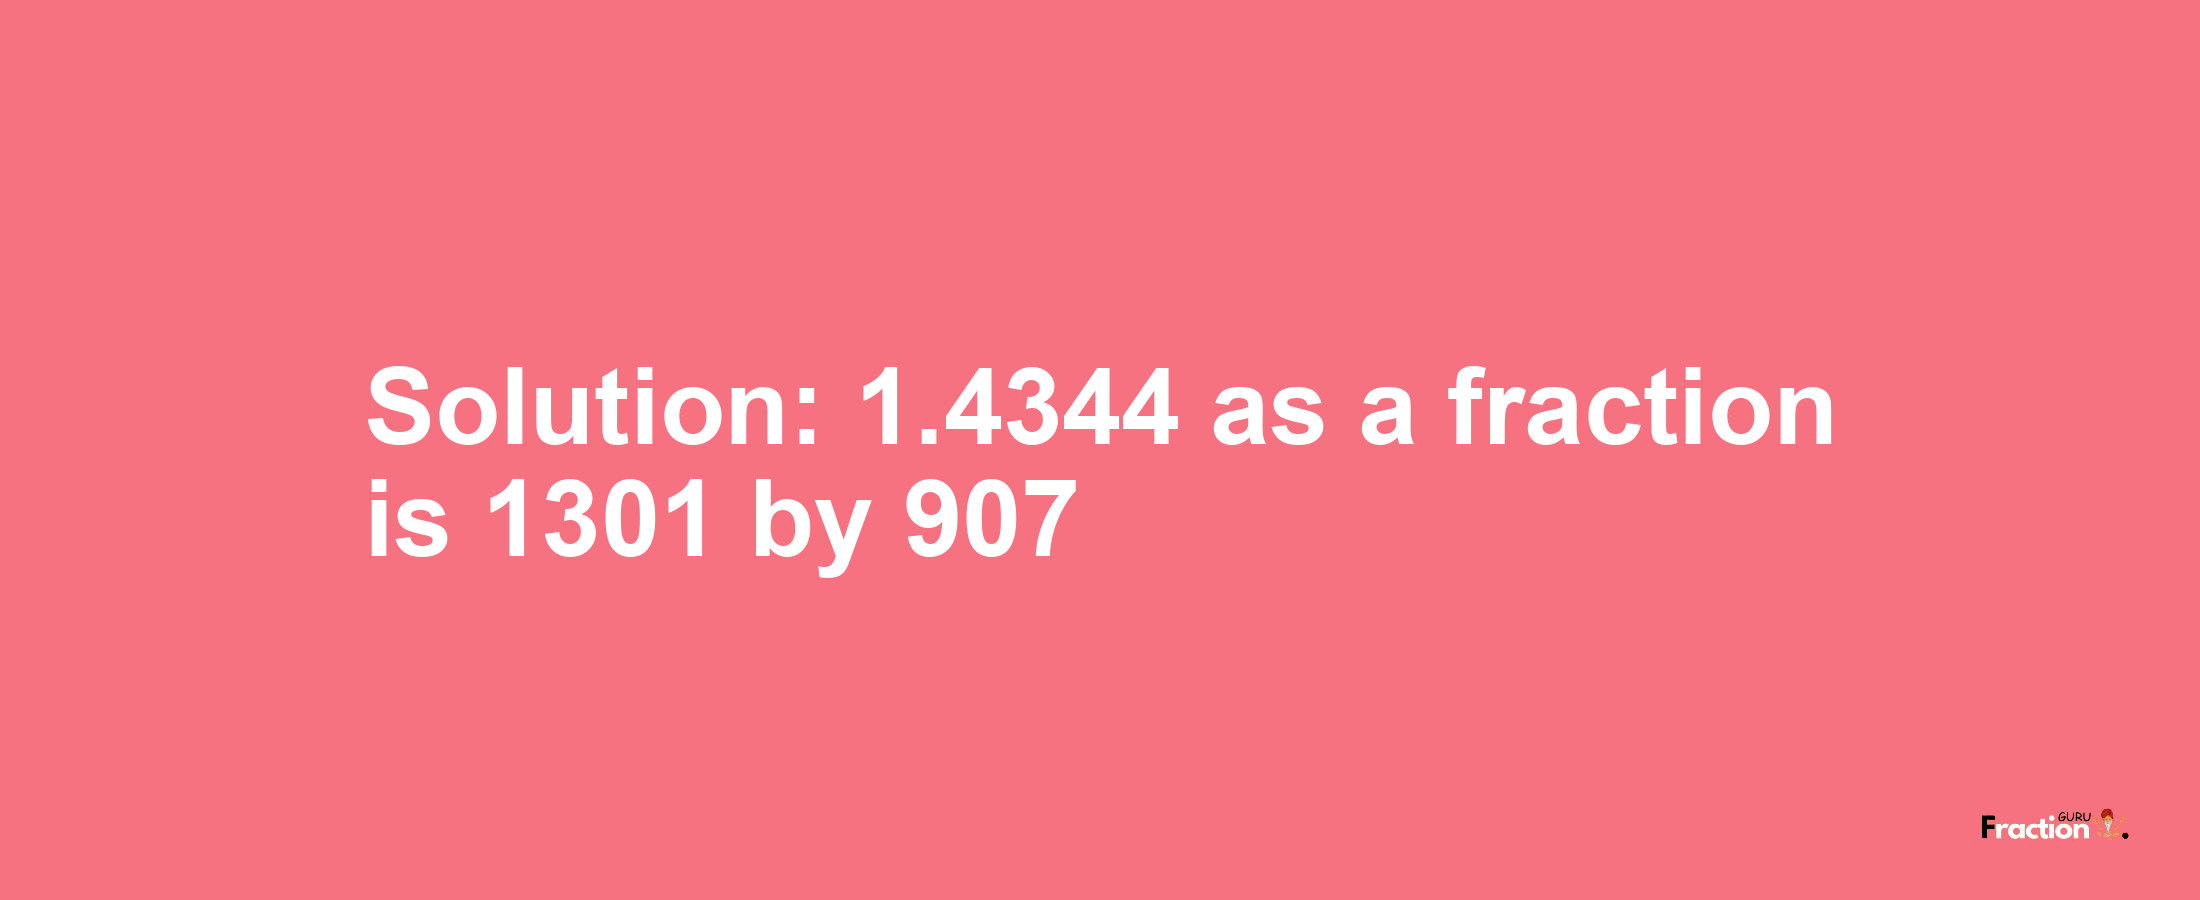 Solution:1.4344 as a fraction is 1301/907